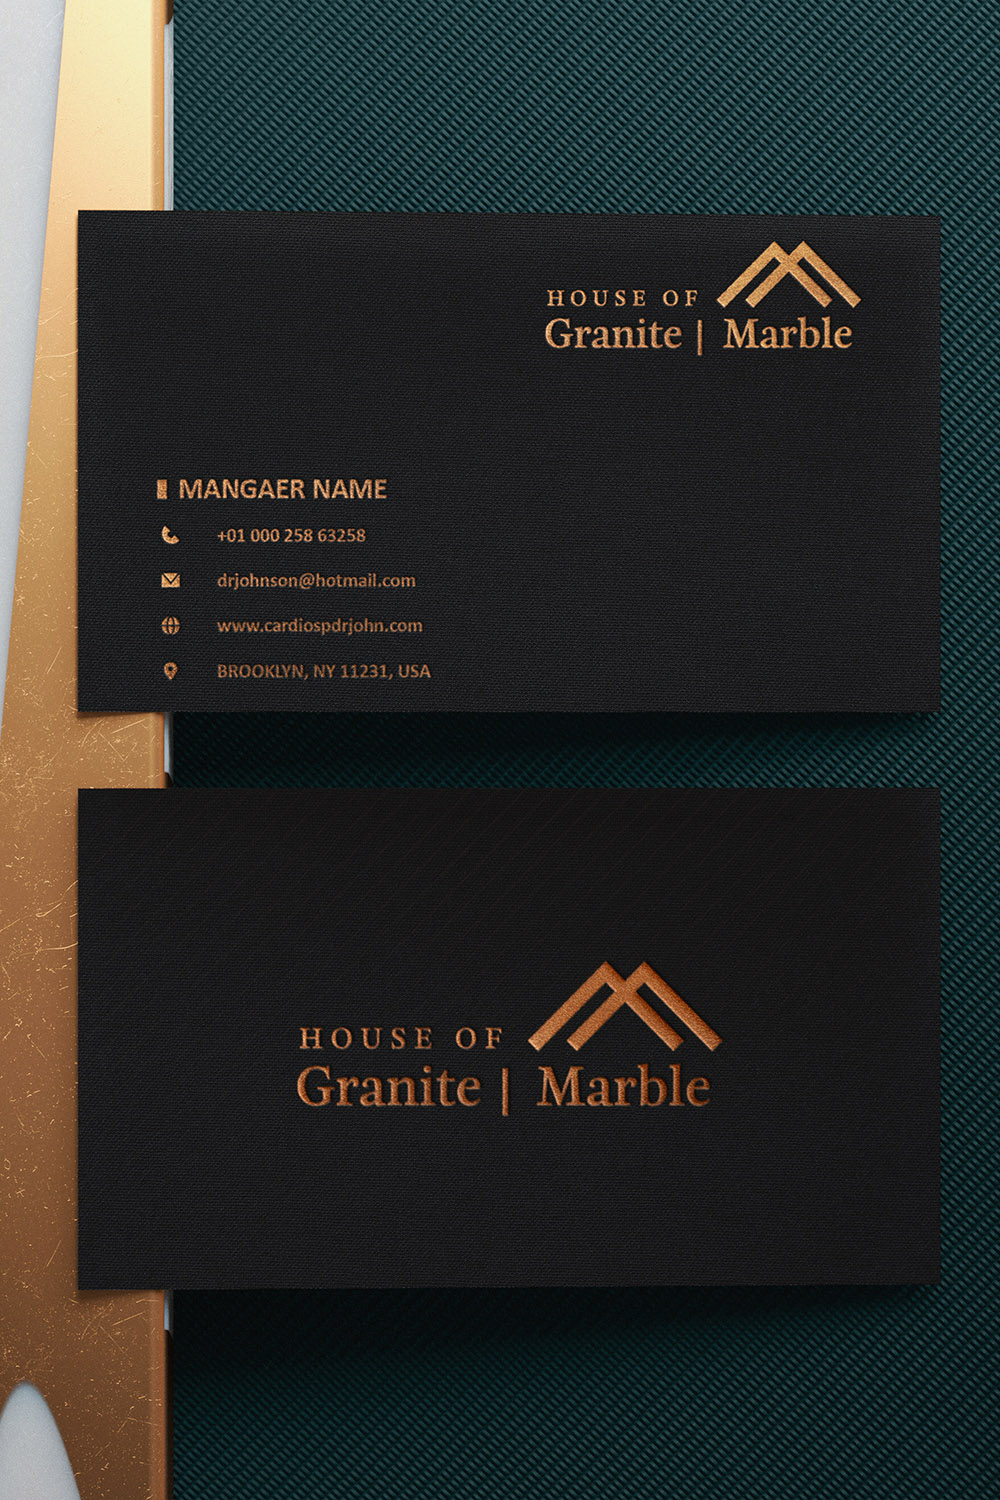 House of Granite Marble Profesional Business Card pinterest image.